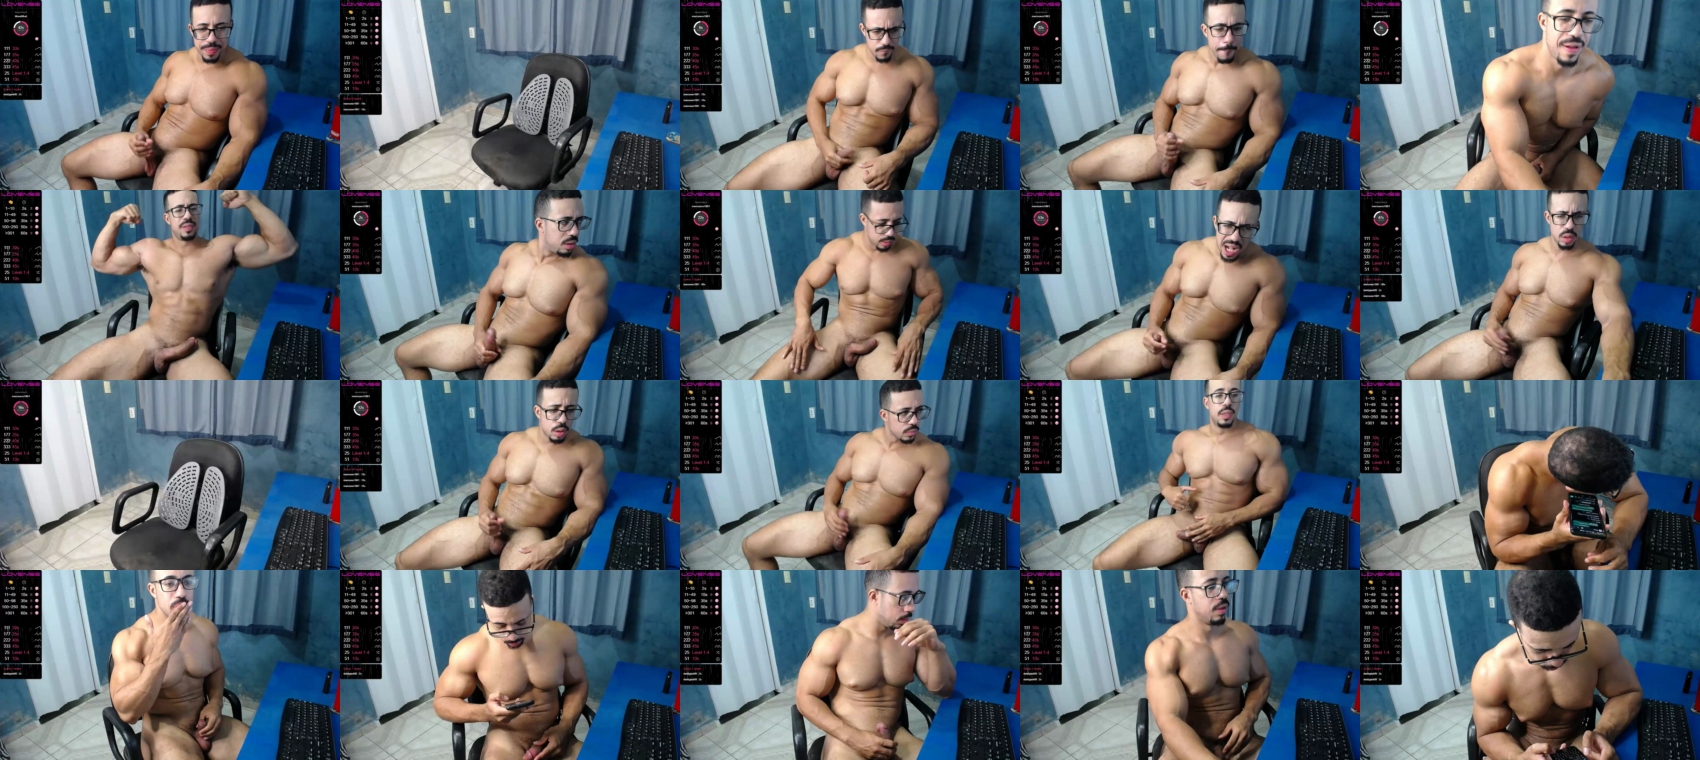 mikehotk  03-04-2022 video jerkoff